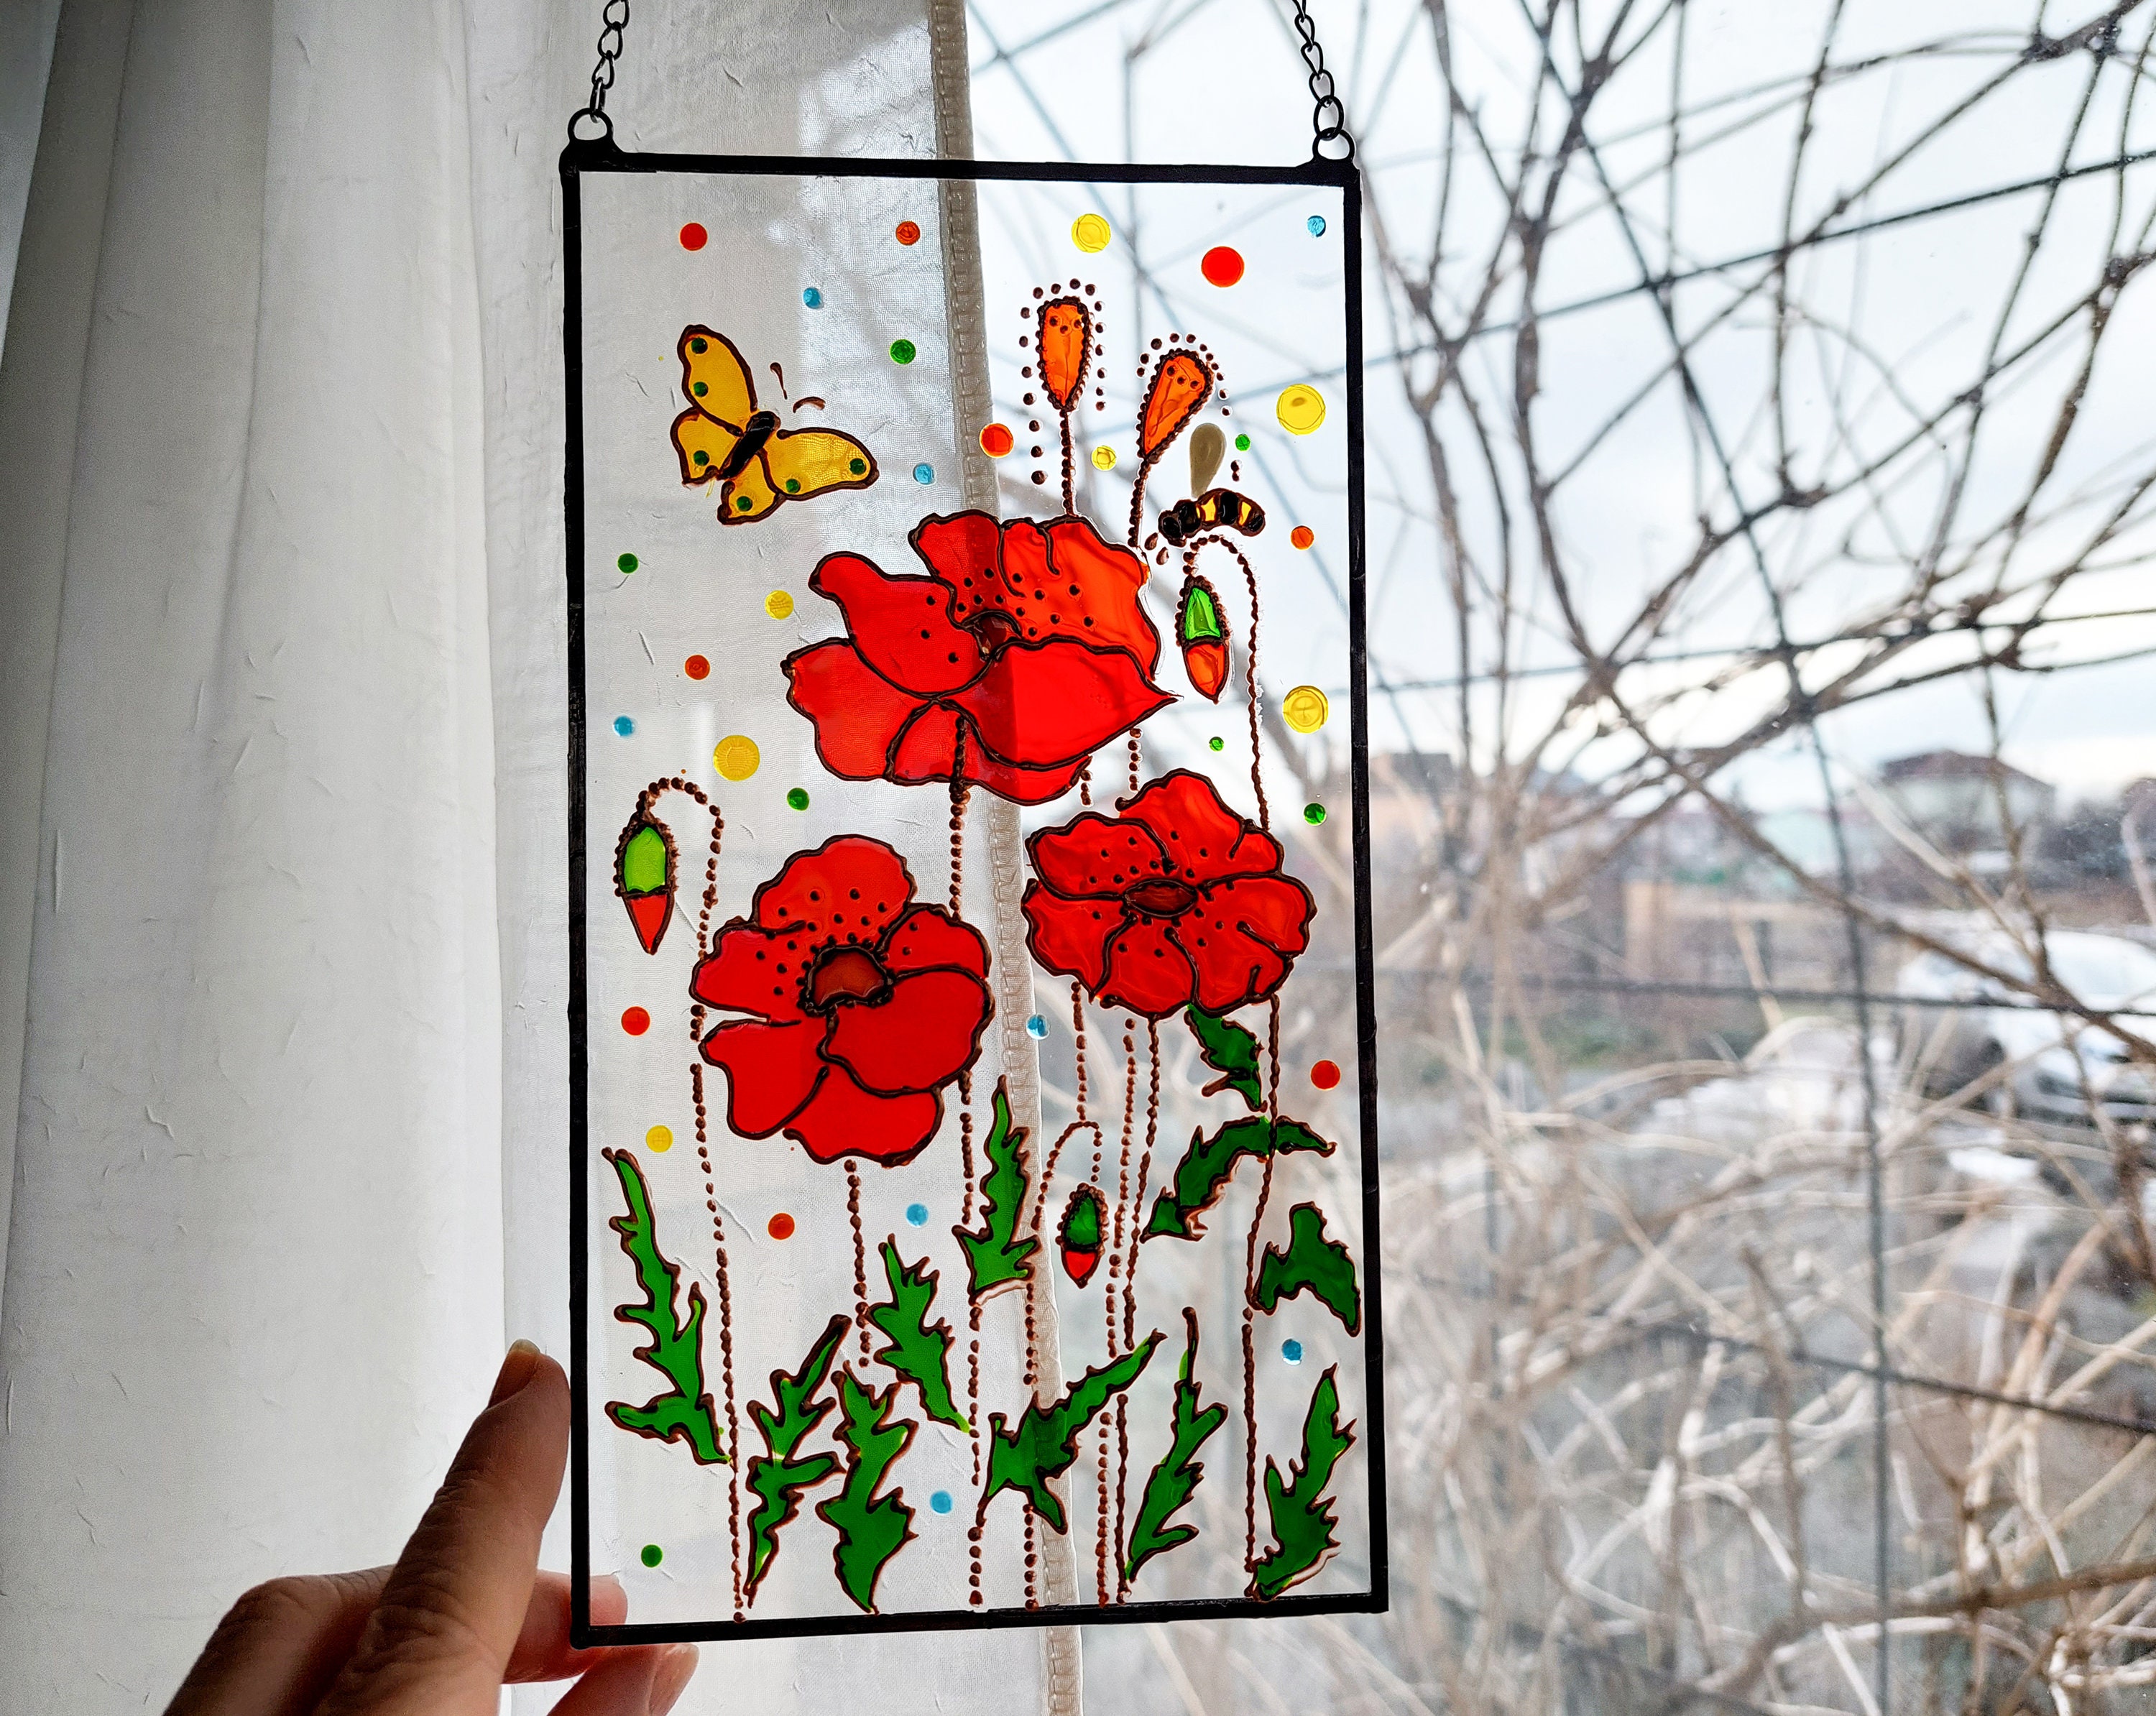 Decorative Hand Painted Stained Glass Window Sun Catcher/Roundel in a Meadow Poppies Design. 